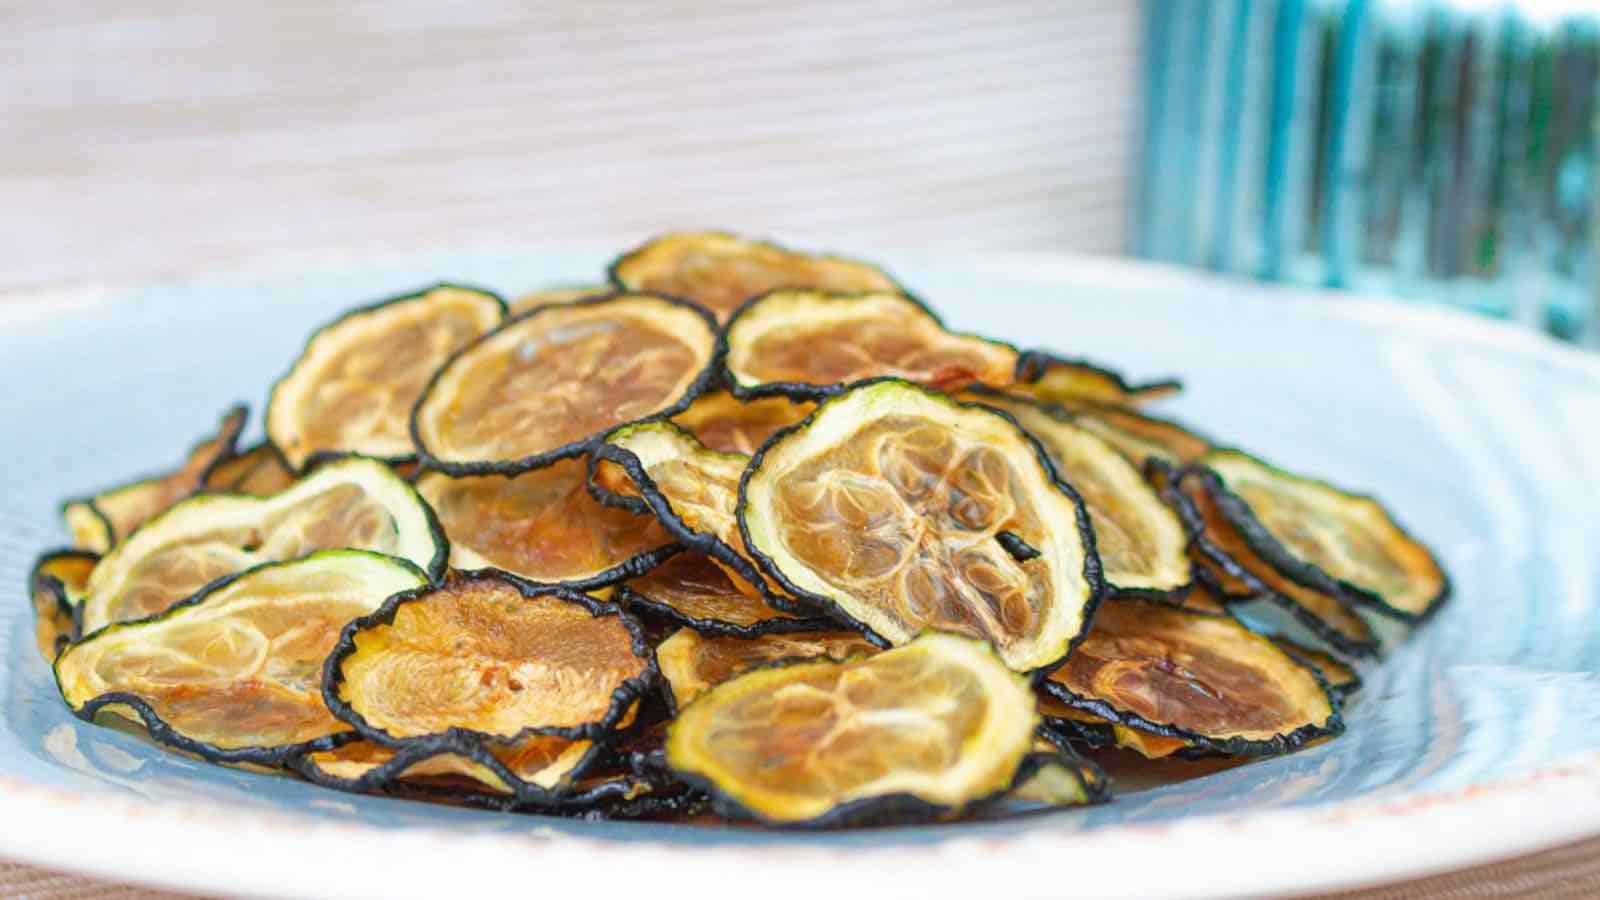 <p>Move over potato chips, and make way for Crispy Baked Zucchini Chips – a wholesome alternative that’s low in carbs and high in flavor. These chips offer a delicious crunch and savory taste, perfect for those who want to enjoy guilt-free snacking without compromising on taste. Dive into the world of crispy goodness and savor the simplicity of a low-carb snacking option that hits the spot.<br><strong>Get the Recipe: </strong><a href="https://www.lowcarb-nocarb.com/baked-zucchini-chips/?utm_source=msn&utm_medium=page&utm_campaign=msn">Crispy Baked Zucchini Chips</a></p>